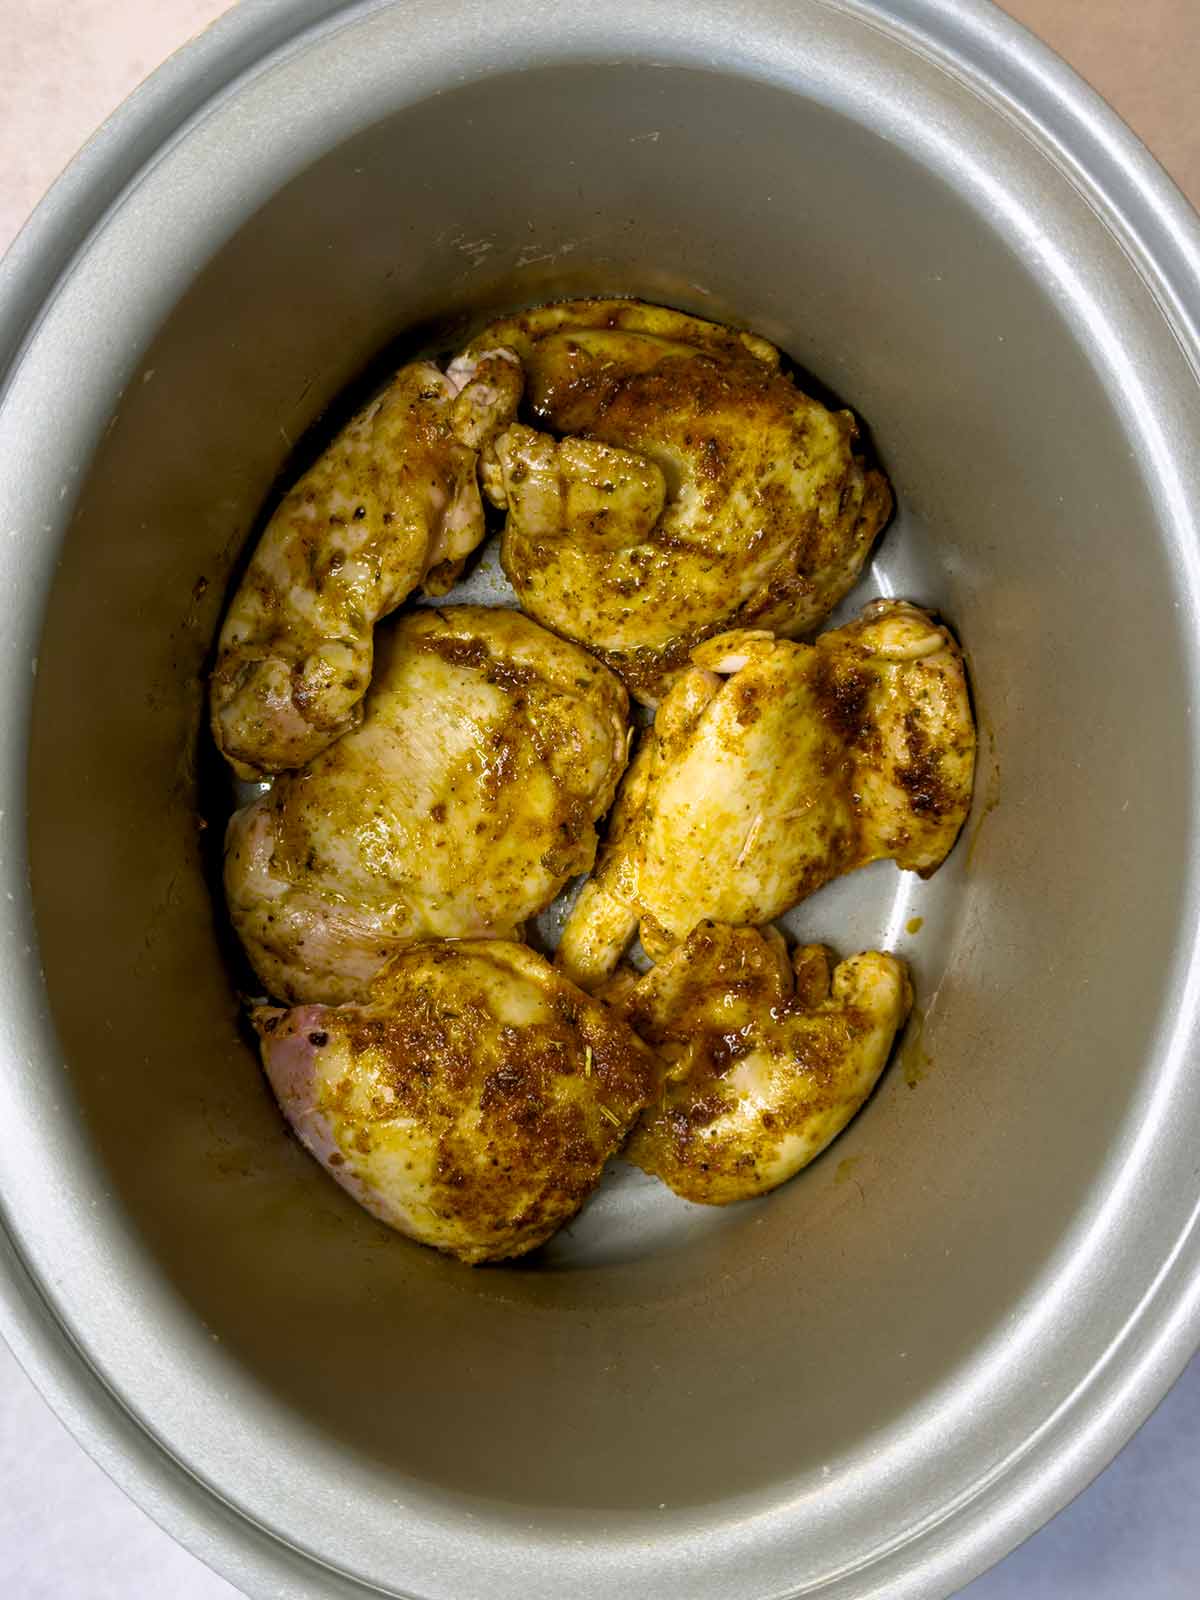 Part cooked chicken thighs in a slow cooker.